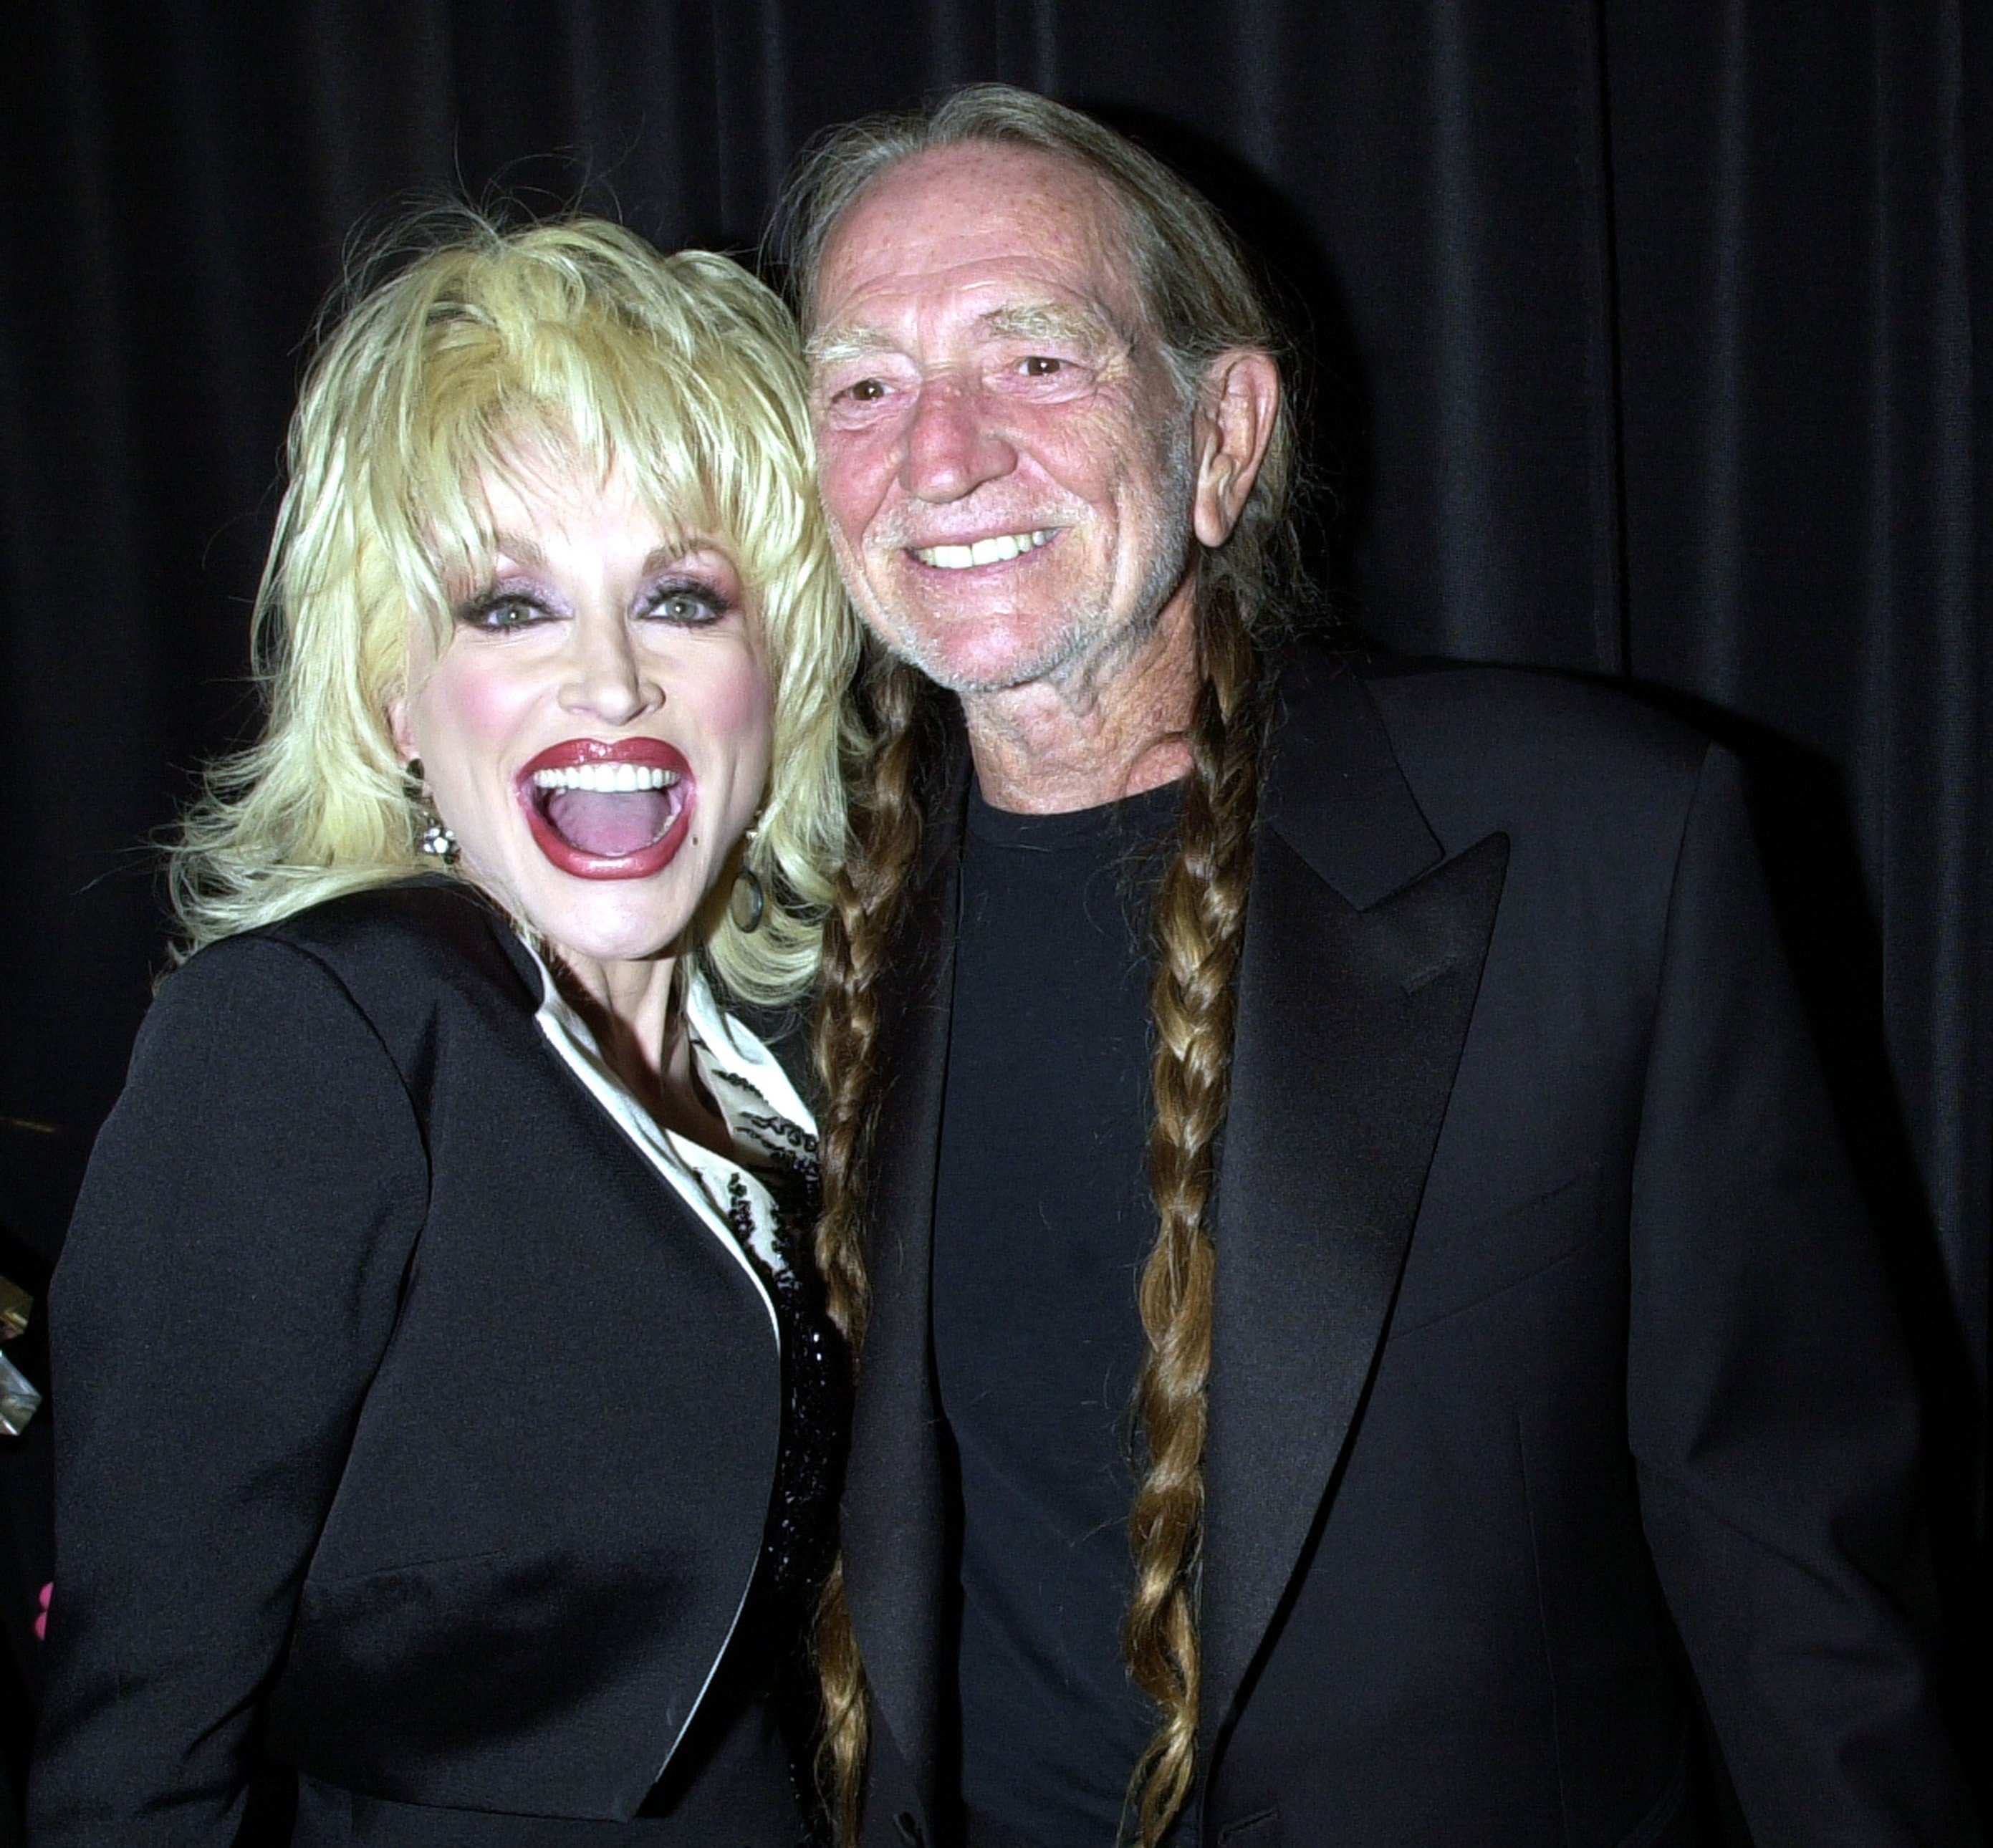 Dolly Parton and Willie Nelson both wear black outfits and stand in front of a black curtain.